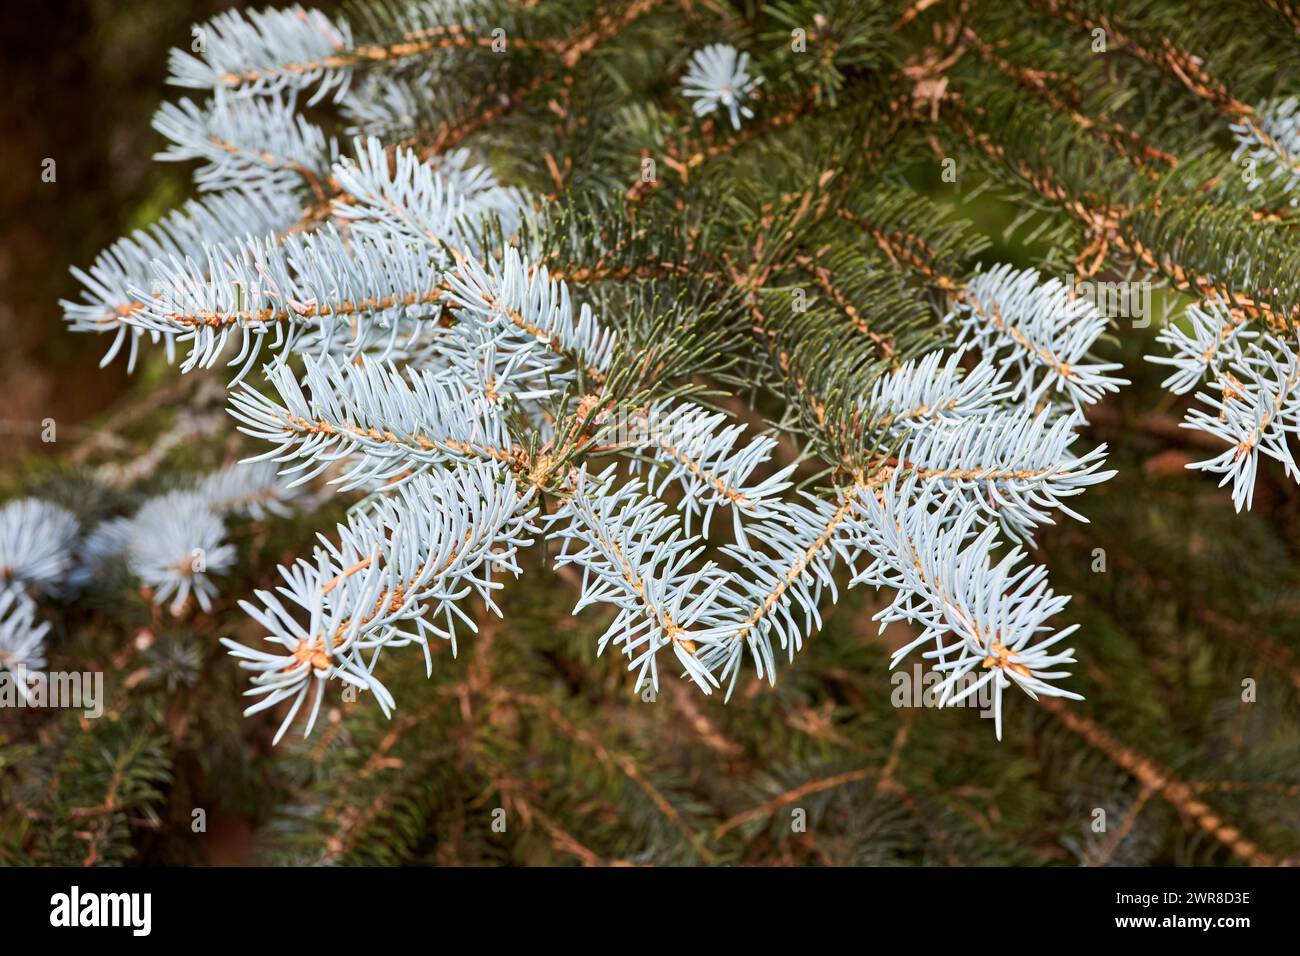 Blue spruce Picea pungens or green spruce Colorado spruce or Colorado blue spruce coniferous evergreen tree branches. Natural floral background of Stock Photo